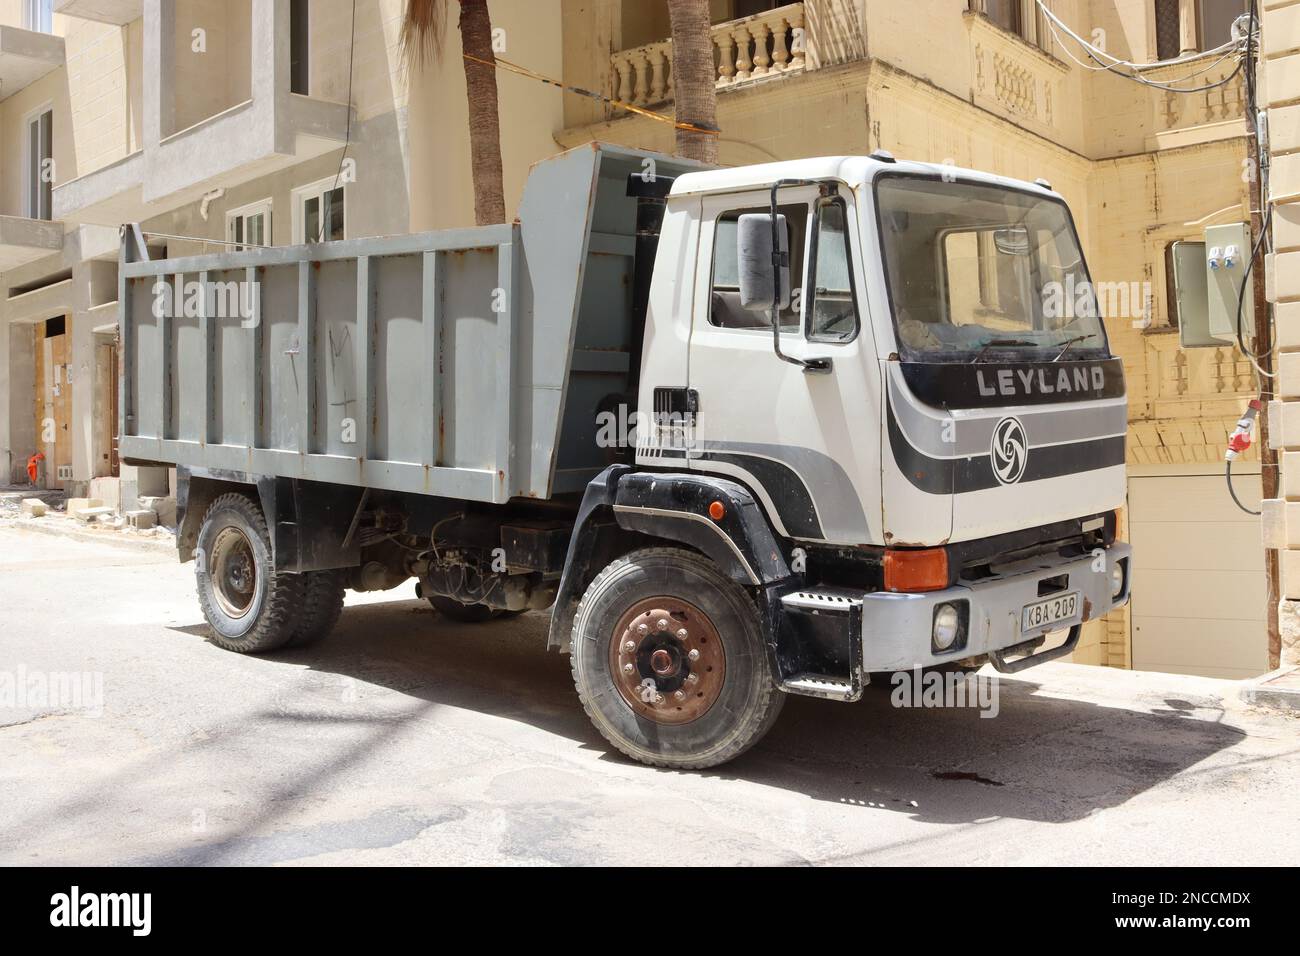 A vintage Leyland T45 tipper, now bestowed with Classic Commercial status, awaits its next task on a building site in Xaghra, Gozo, Malta, June 2022. Stock Photo